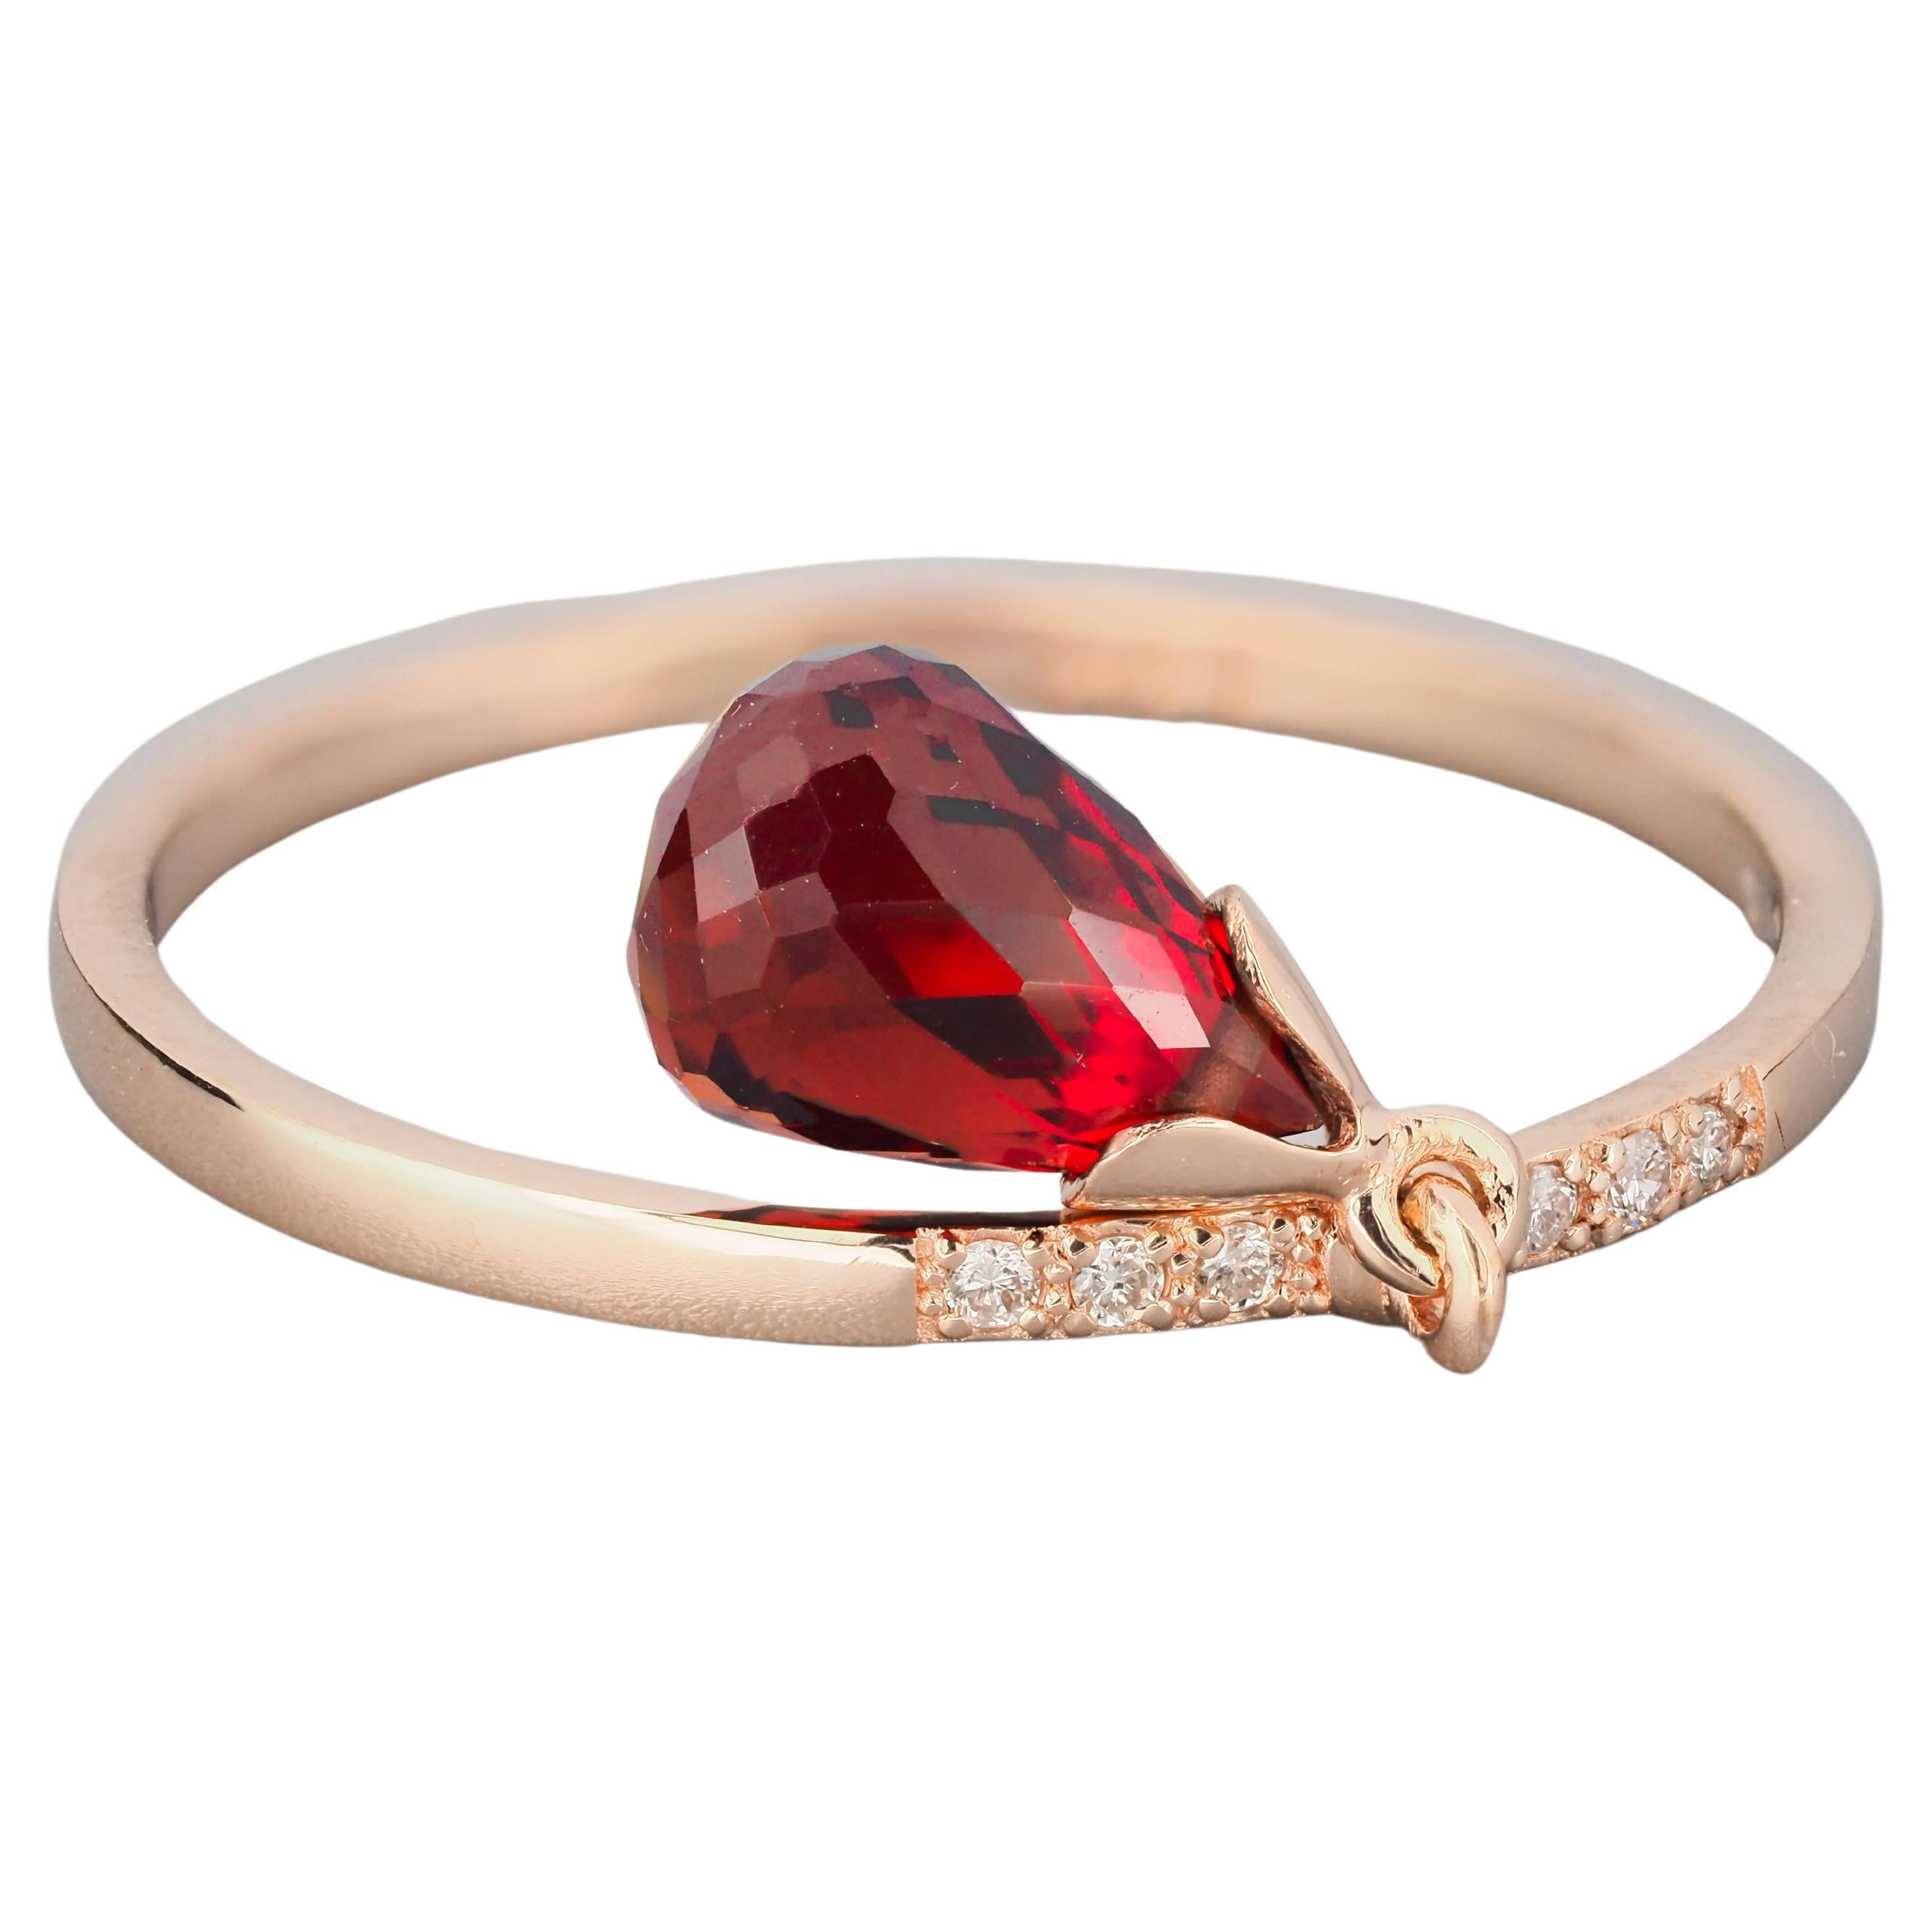 For Sale:  14k Gold Ring with Briolette Cut Garnet and Diamonds